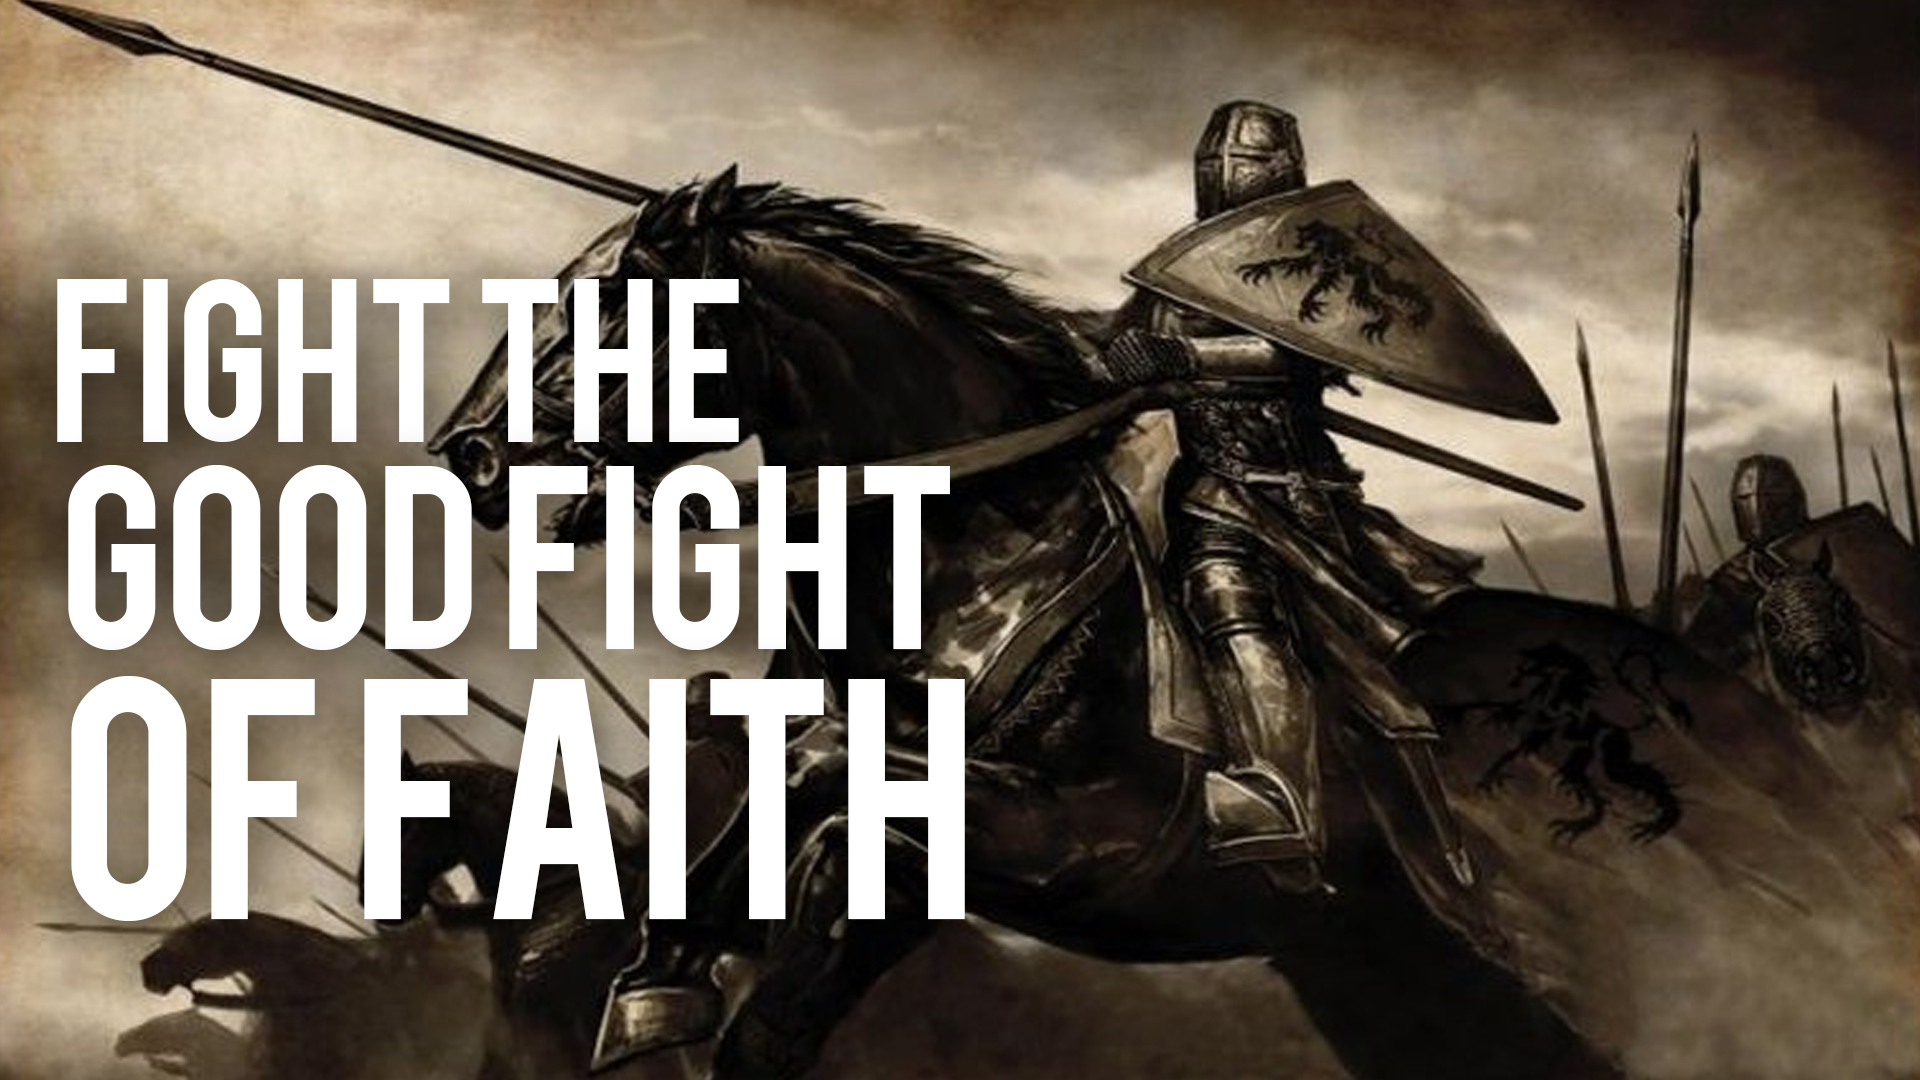 Fighting with faith!